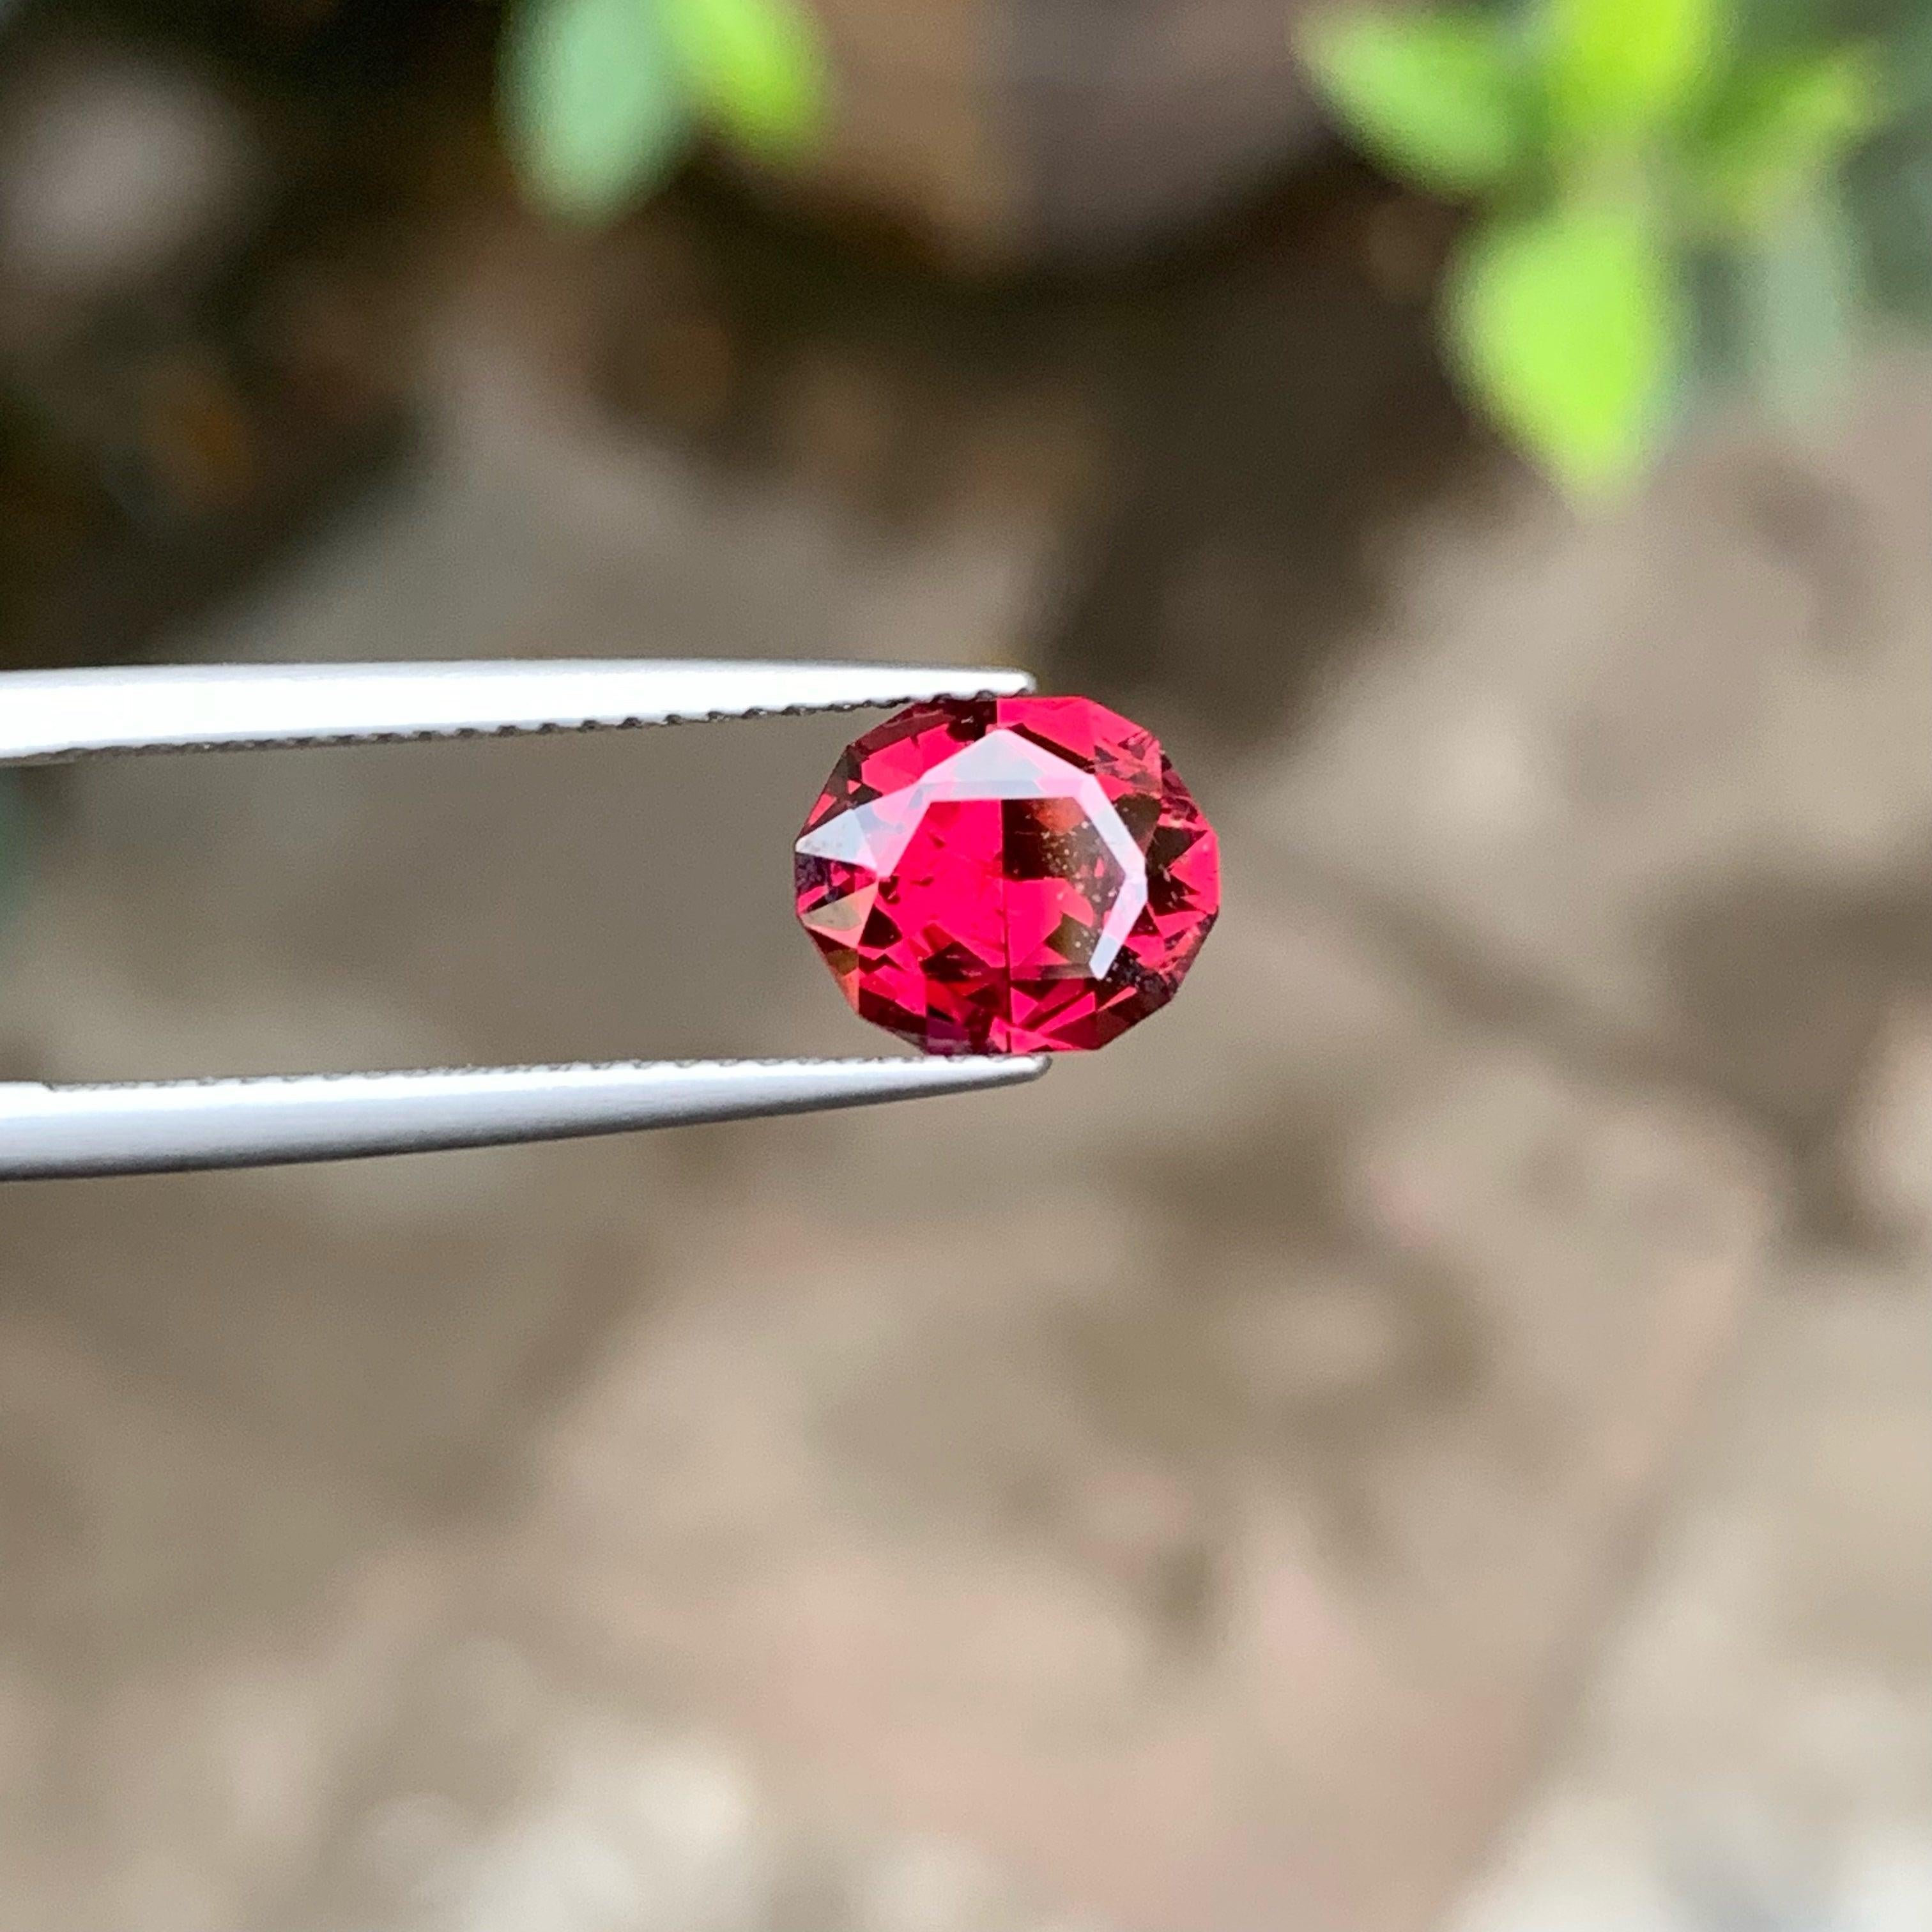 Excellent Bright Red Cut Garnet, Available for sale at whole sale price natural high quality 2.50 carats Vvs Clarity Loose Garnet from Malawi.

Product Information:
GEMSTONE NAME:	Excellent Bright Red Cut Garnet
WEIGHT:	2.50 carats
DIMENSIONS:	8.7 x